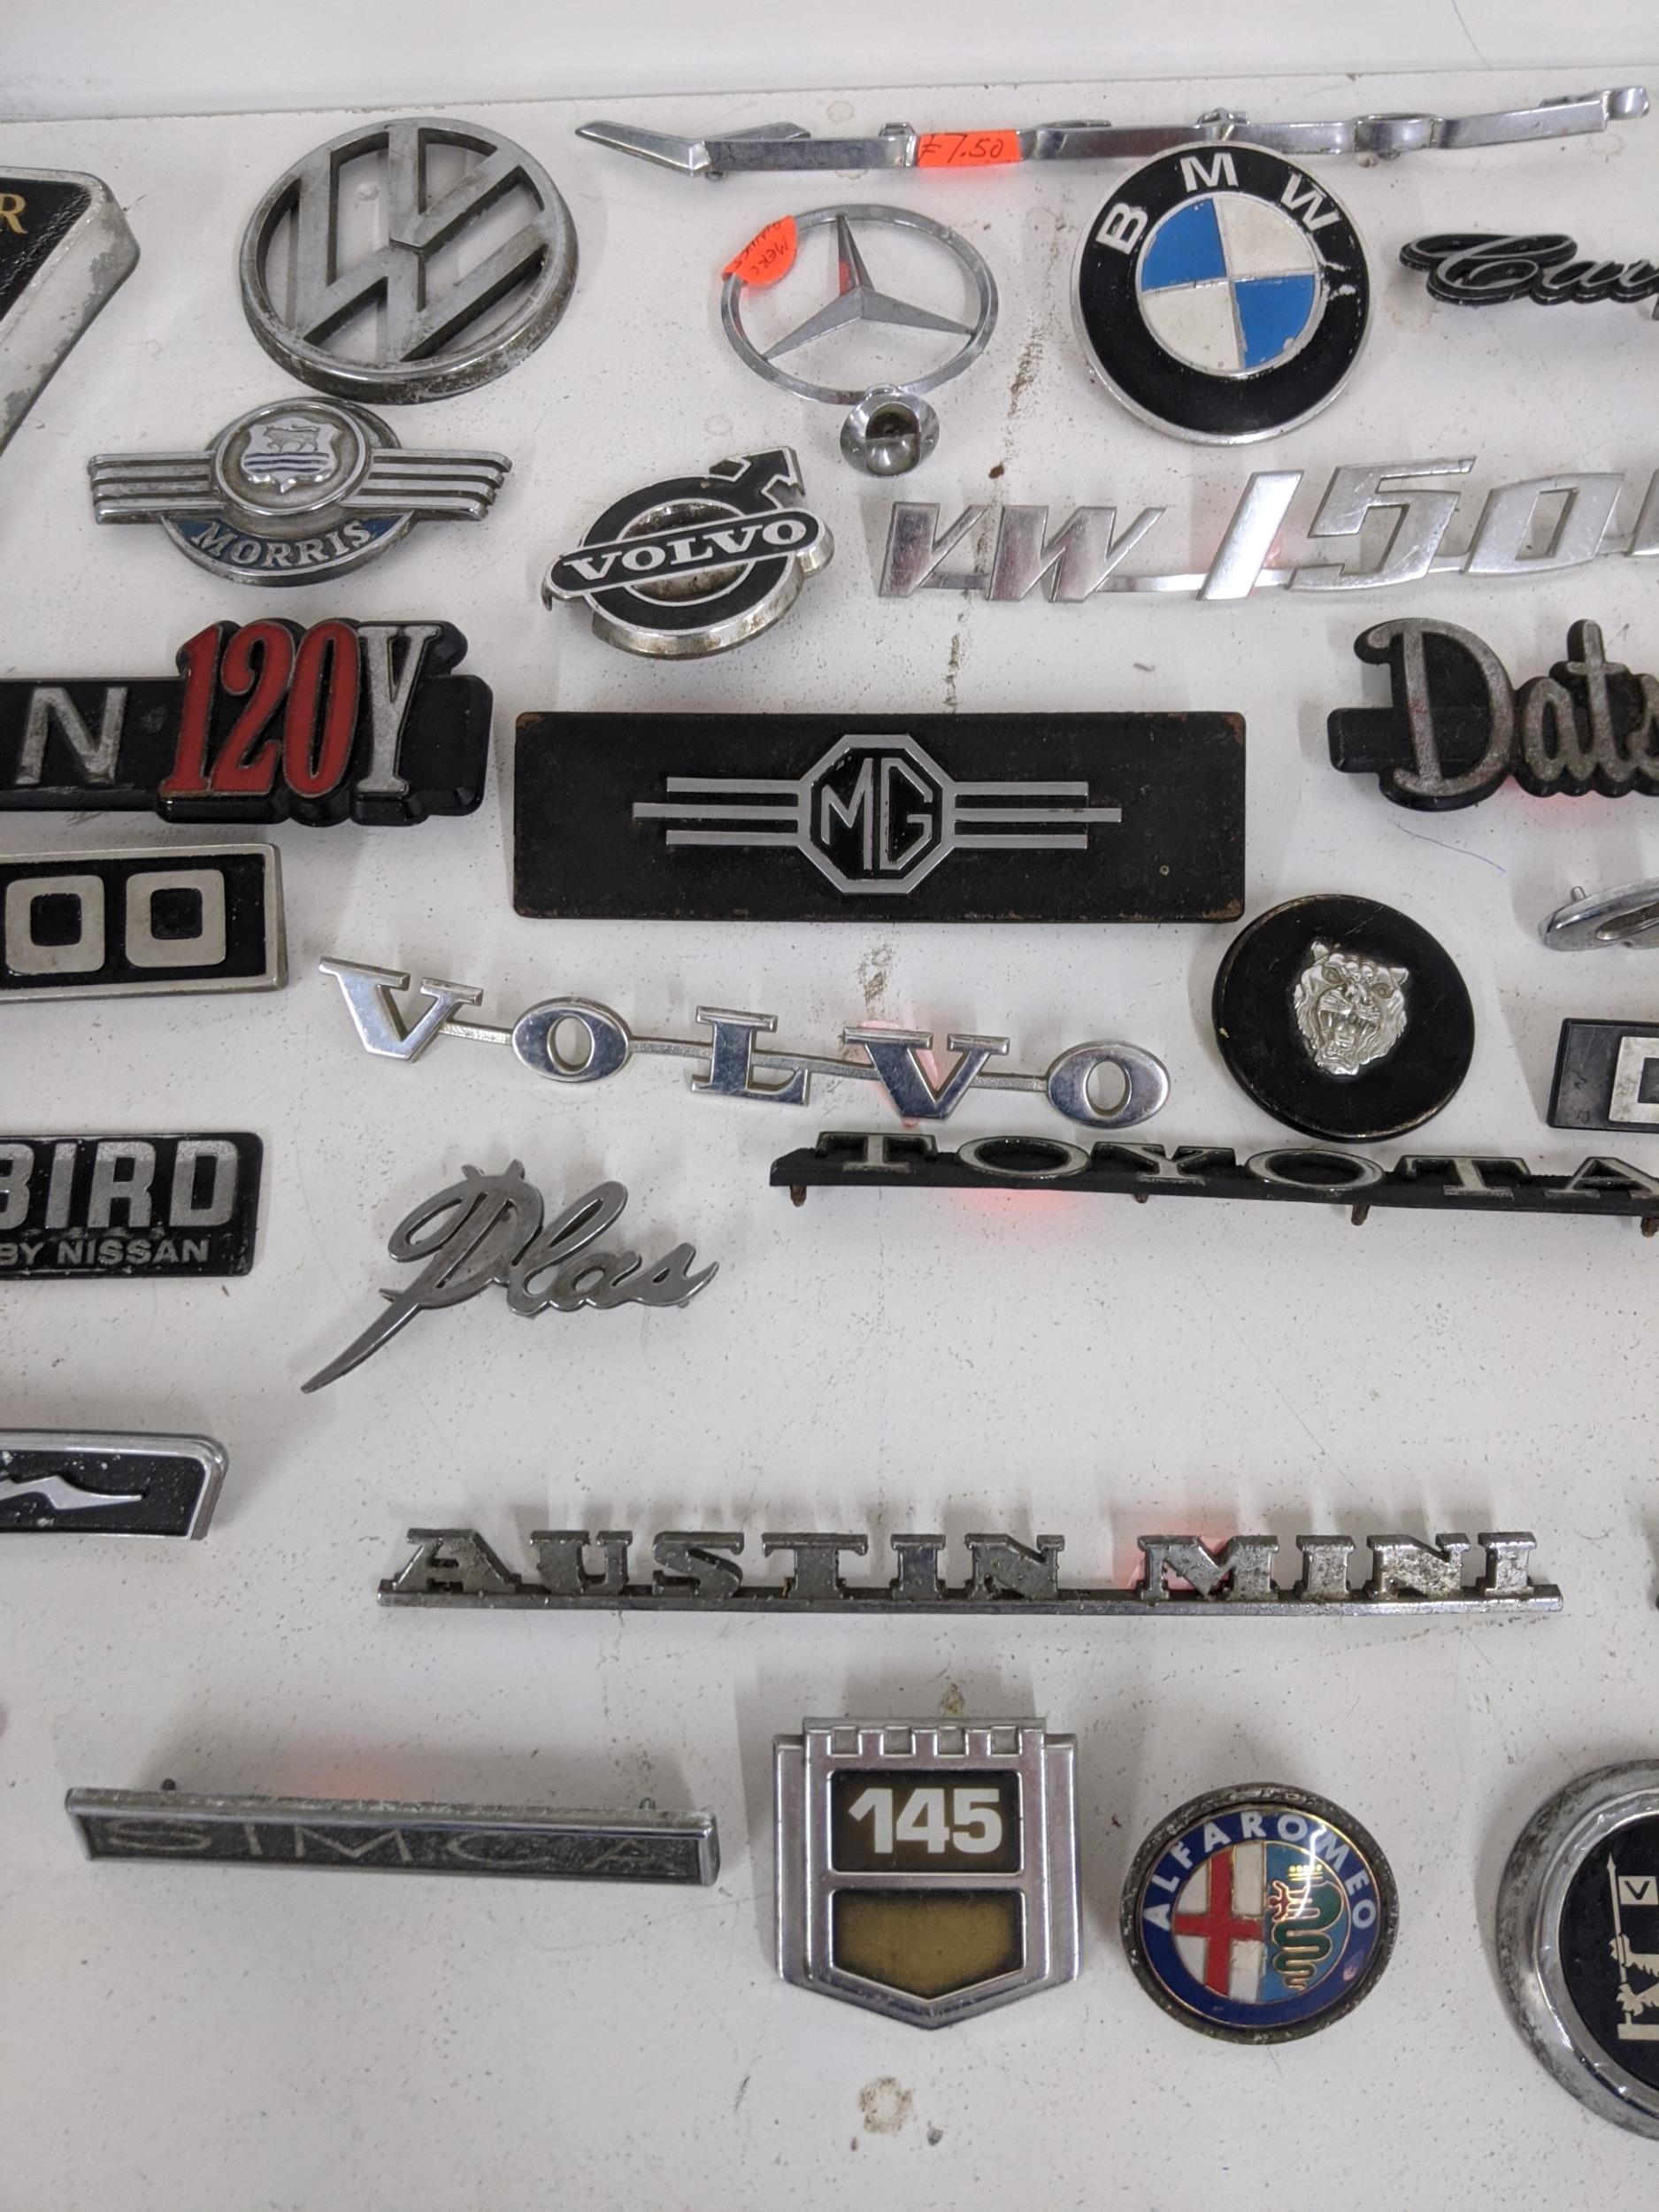 Miscellaneous car make and model badges to include Volvo, Rover, Alfa Romeo, DAF, Austin 1300 - Image 3 of 4